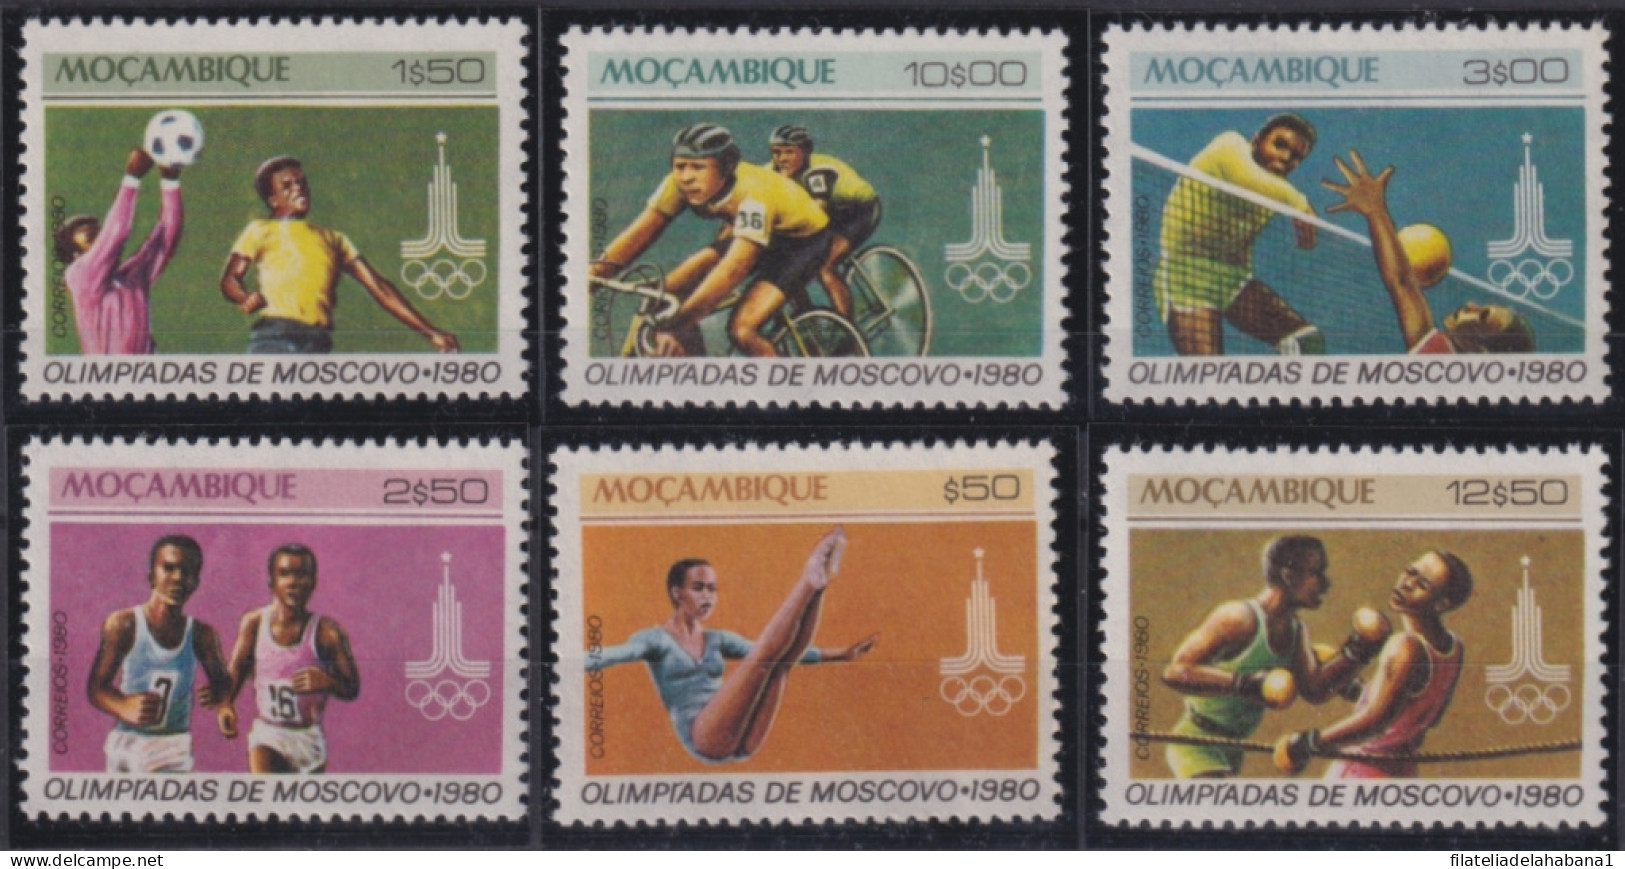 F-EX50250 MOZAMBIQUE MNH 1980 OLYMPIC GAMES MOSCOW CYCLING BOXING ATHLETISM BASKET.  - Zomer 1980: Moskou